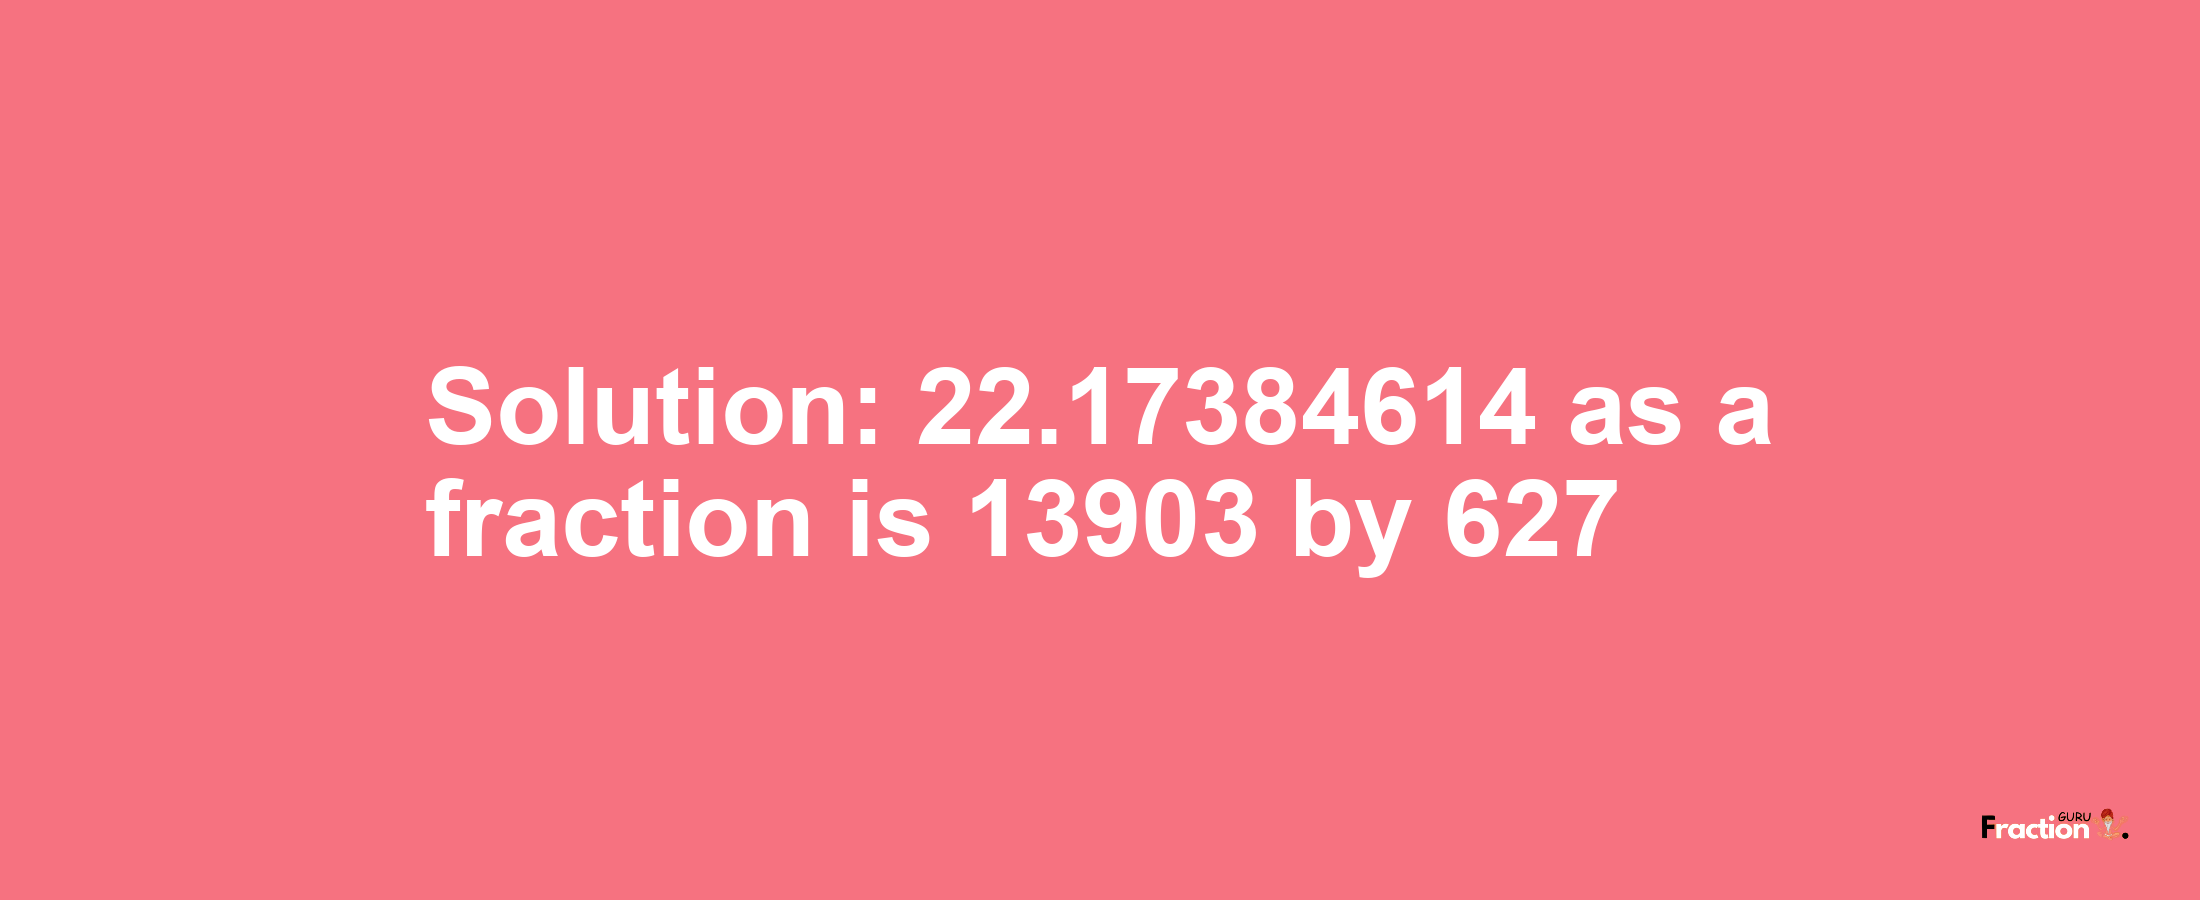 Solution:22.17384614 as a fraction is 13903/627